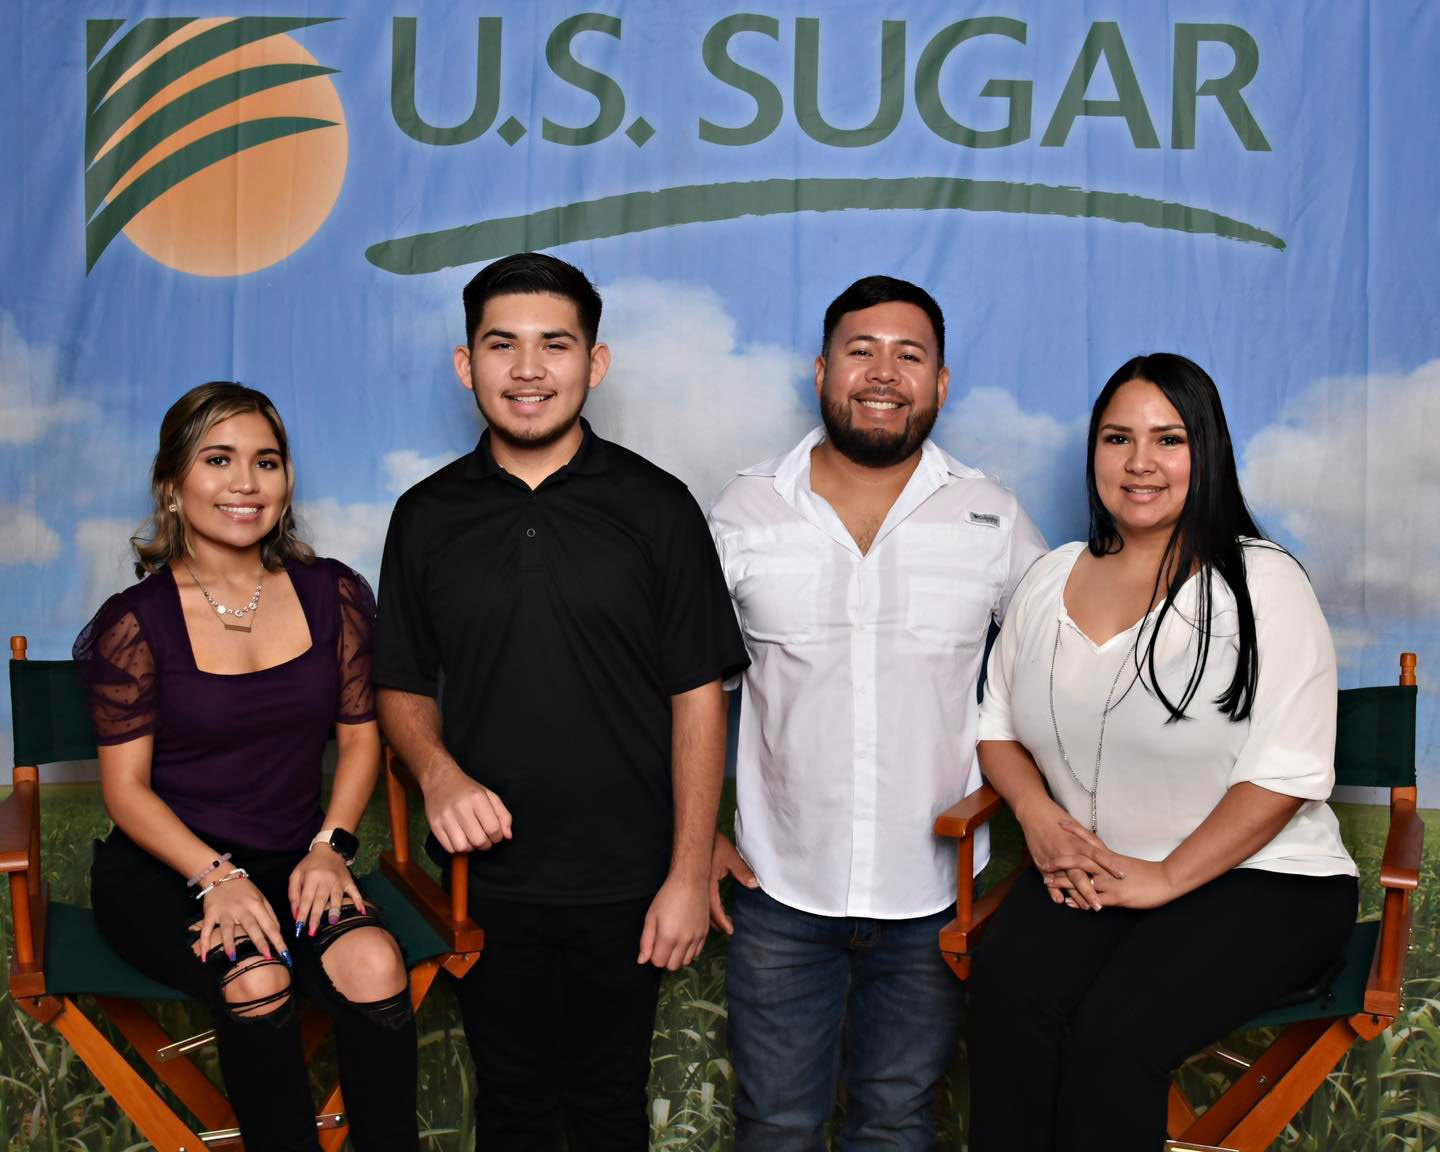 Team Leader Orlando Martinez and his family on hand for the premiere of the How America Works feature on U.S. Sugar.